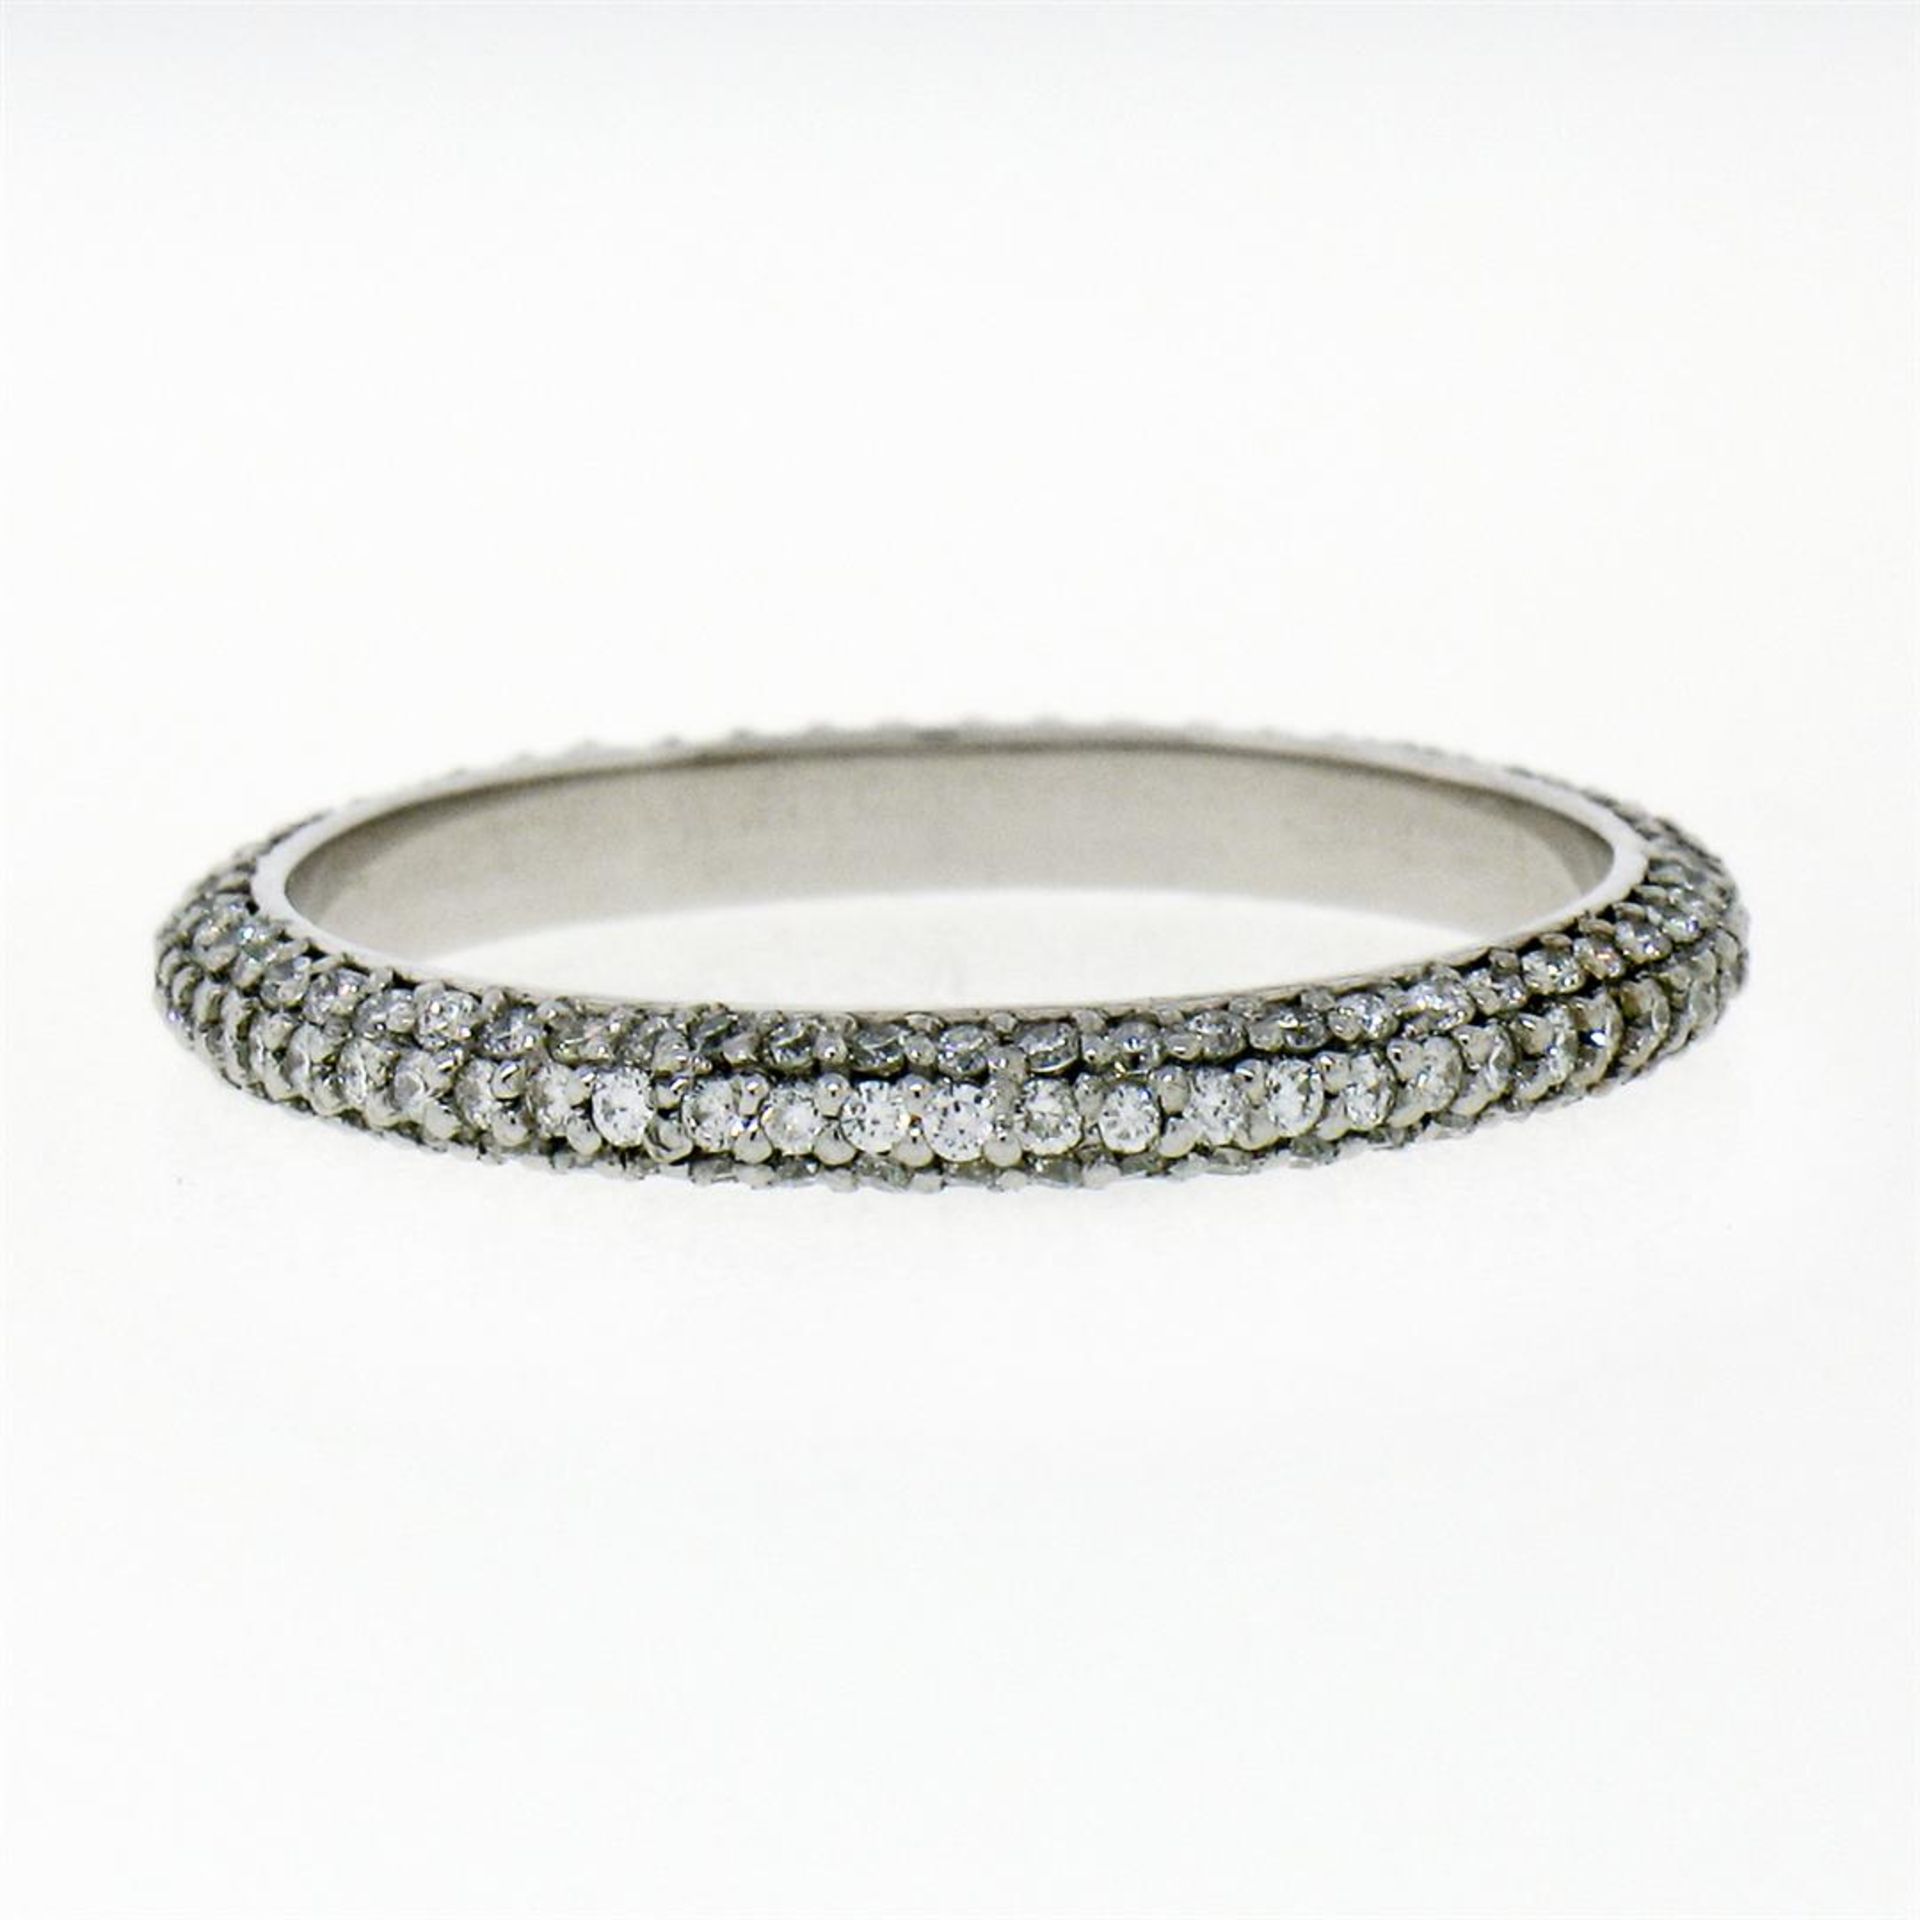 14K White Gold .85ctw Diamond 2.30mm Domed 3 Row Eternity Wedding Band Ring - Image 5 of 6